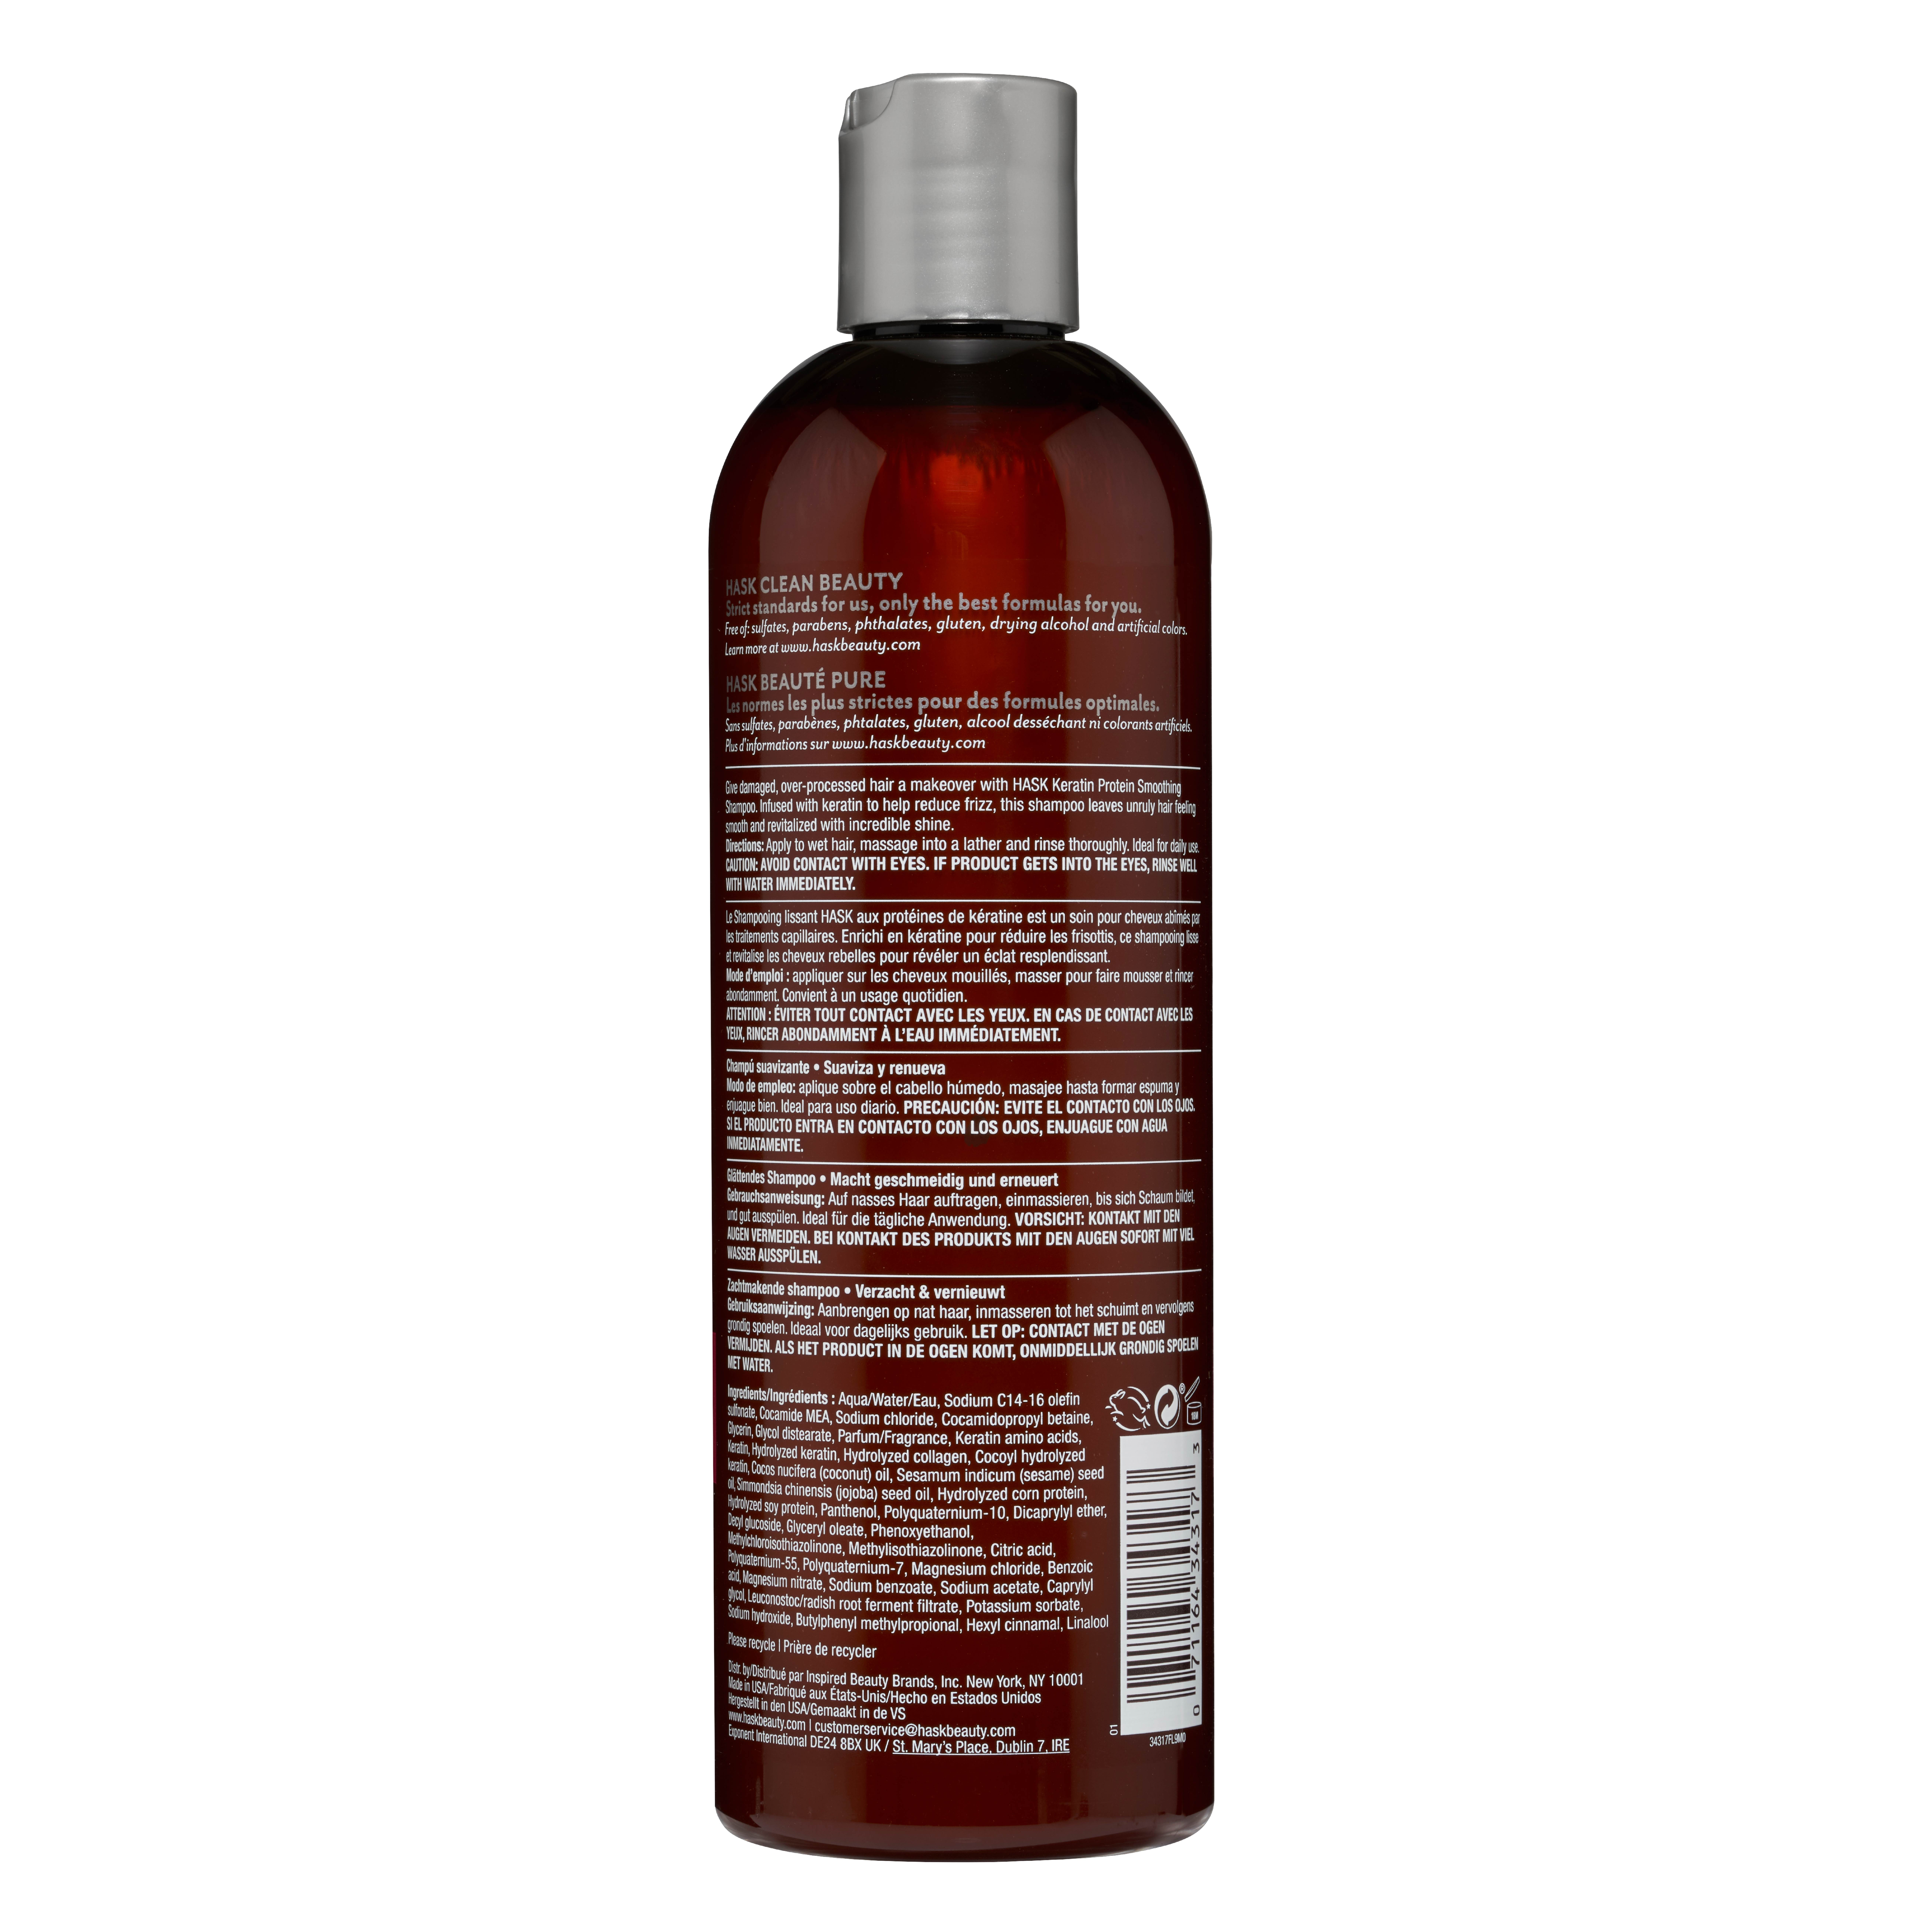 Hask Keratin Protein Smoothing Shine Enhancing Daily Shampoo with Fruity Floral Scent, 12 fl oz - image 2 of 14